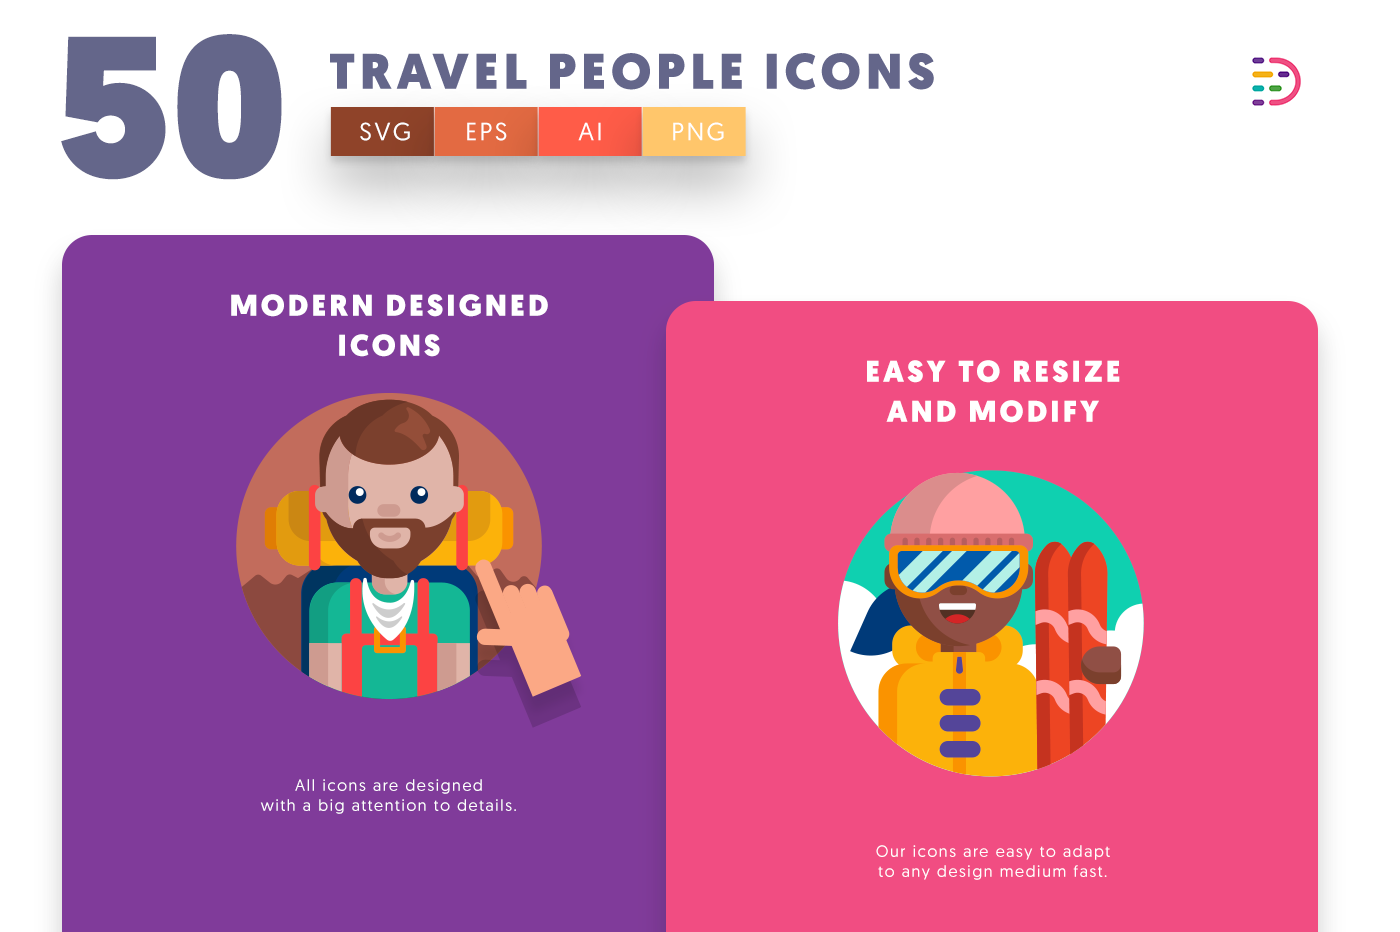 Drag and drop vector 50 Travel People Icons